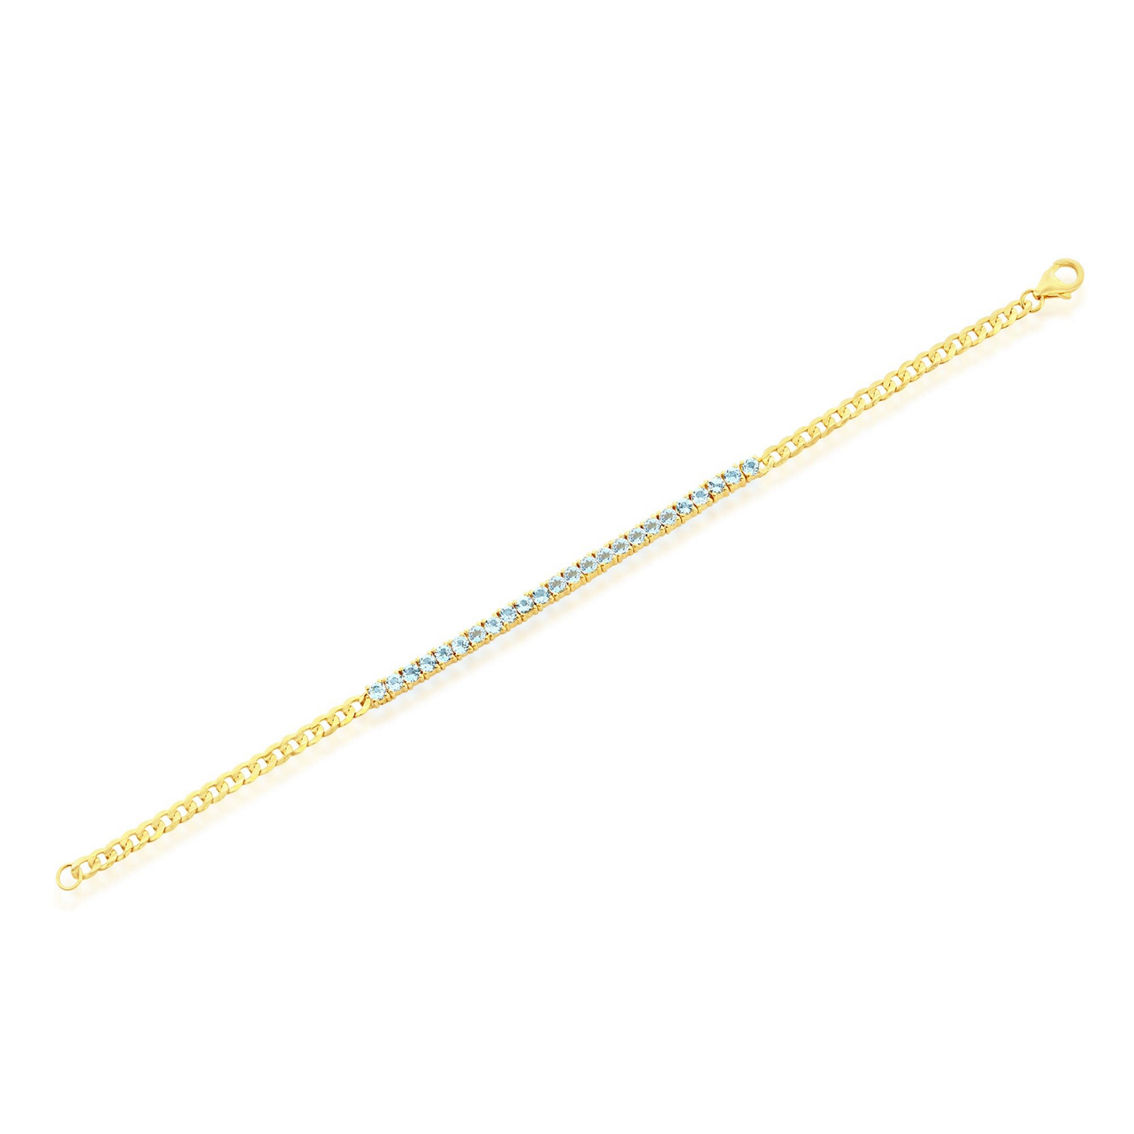 Bellissima Sterling Silver 3.5mm Round B-T Gem Tennis, Chain Bracelet - Gold Plated - Image 2 of 3